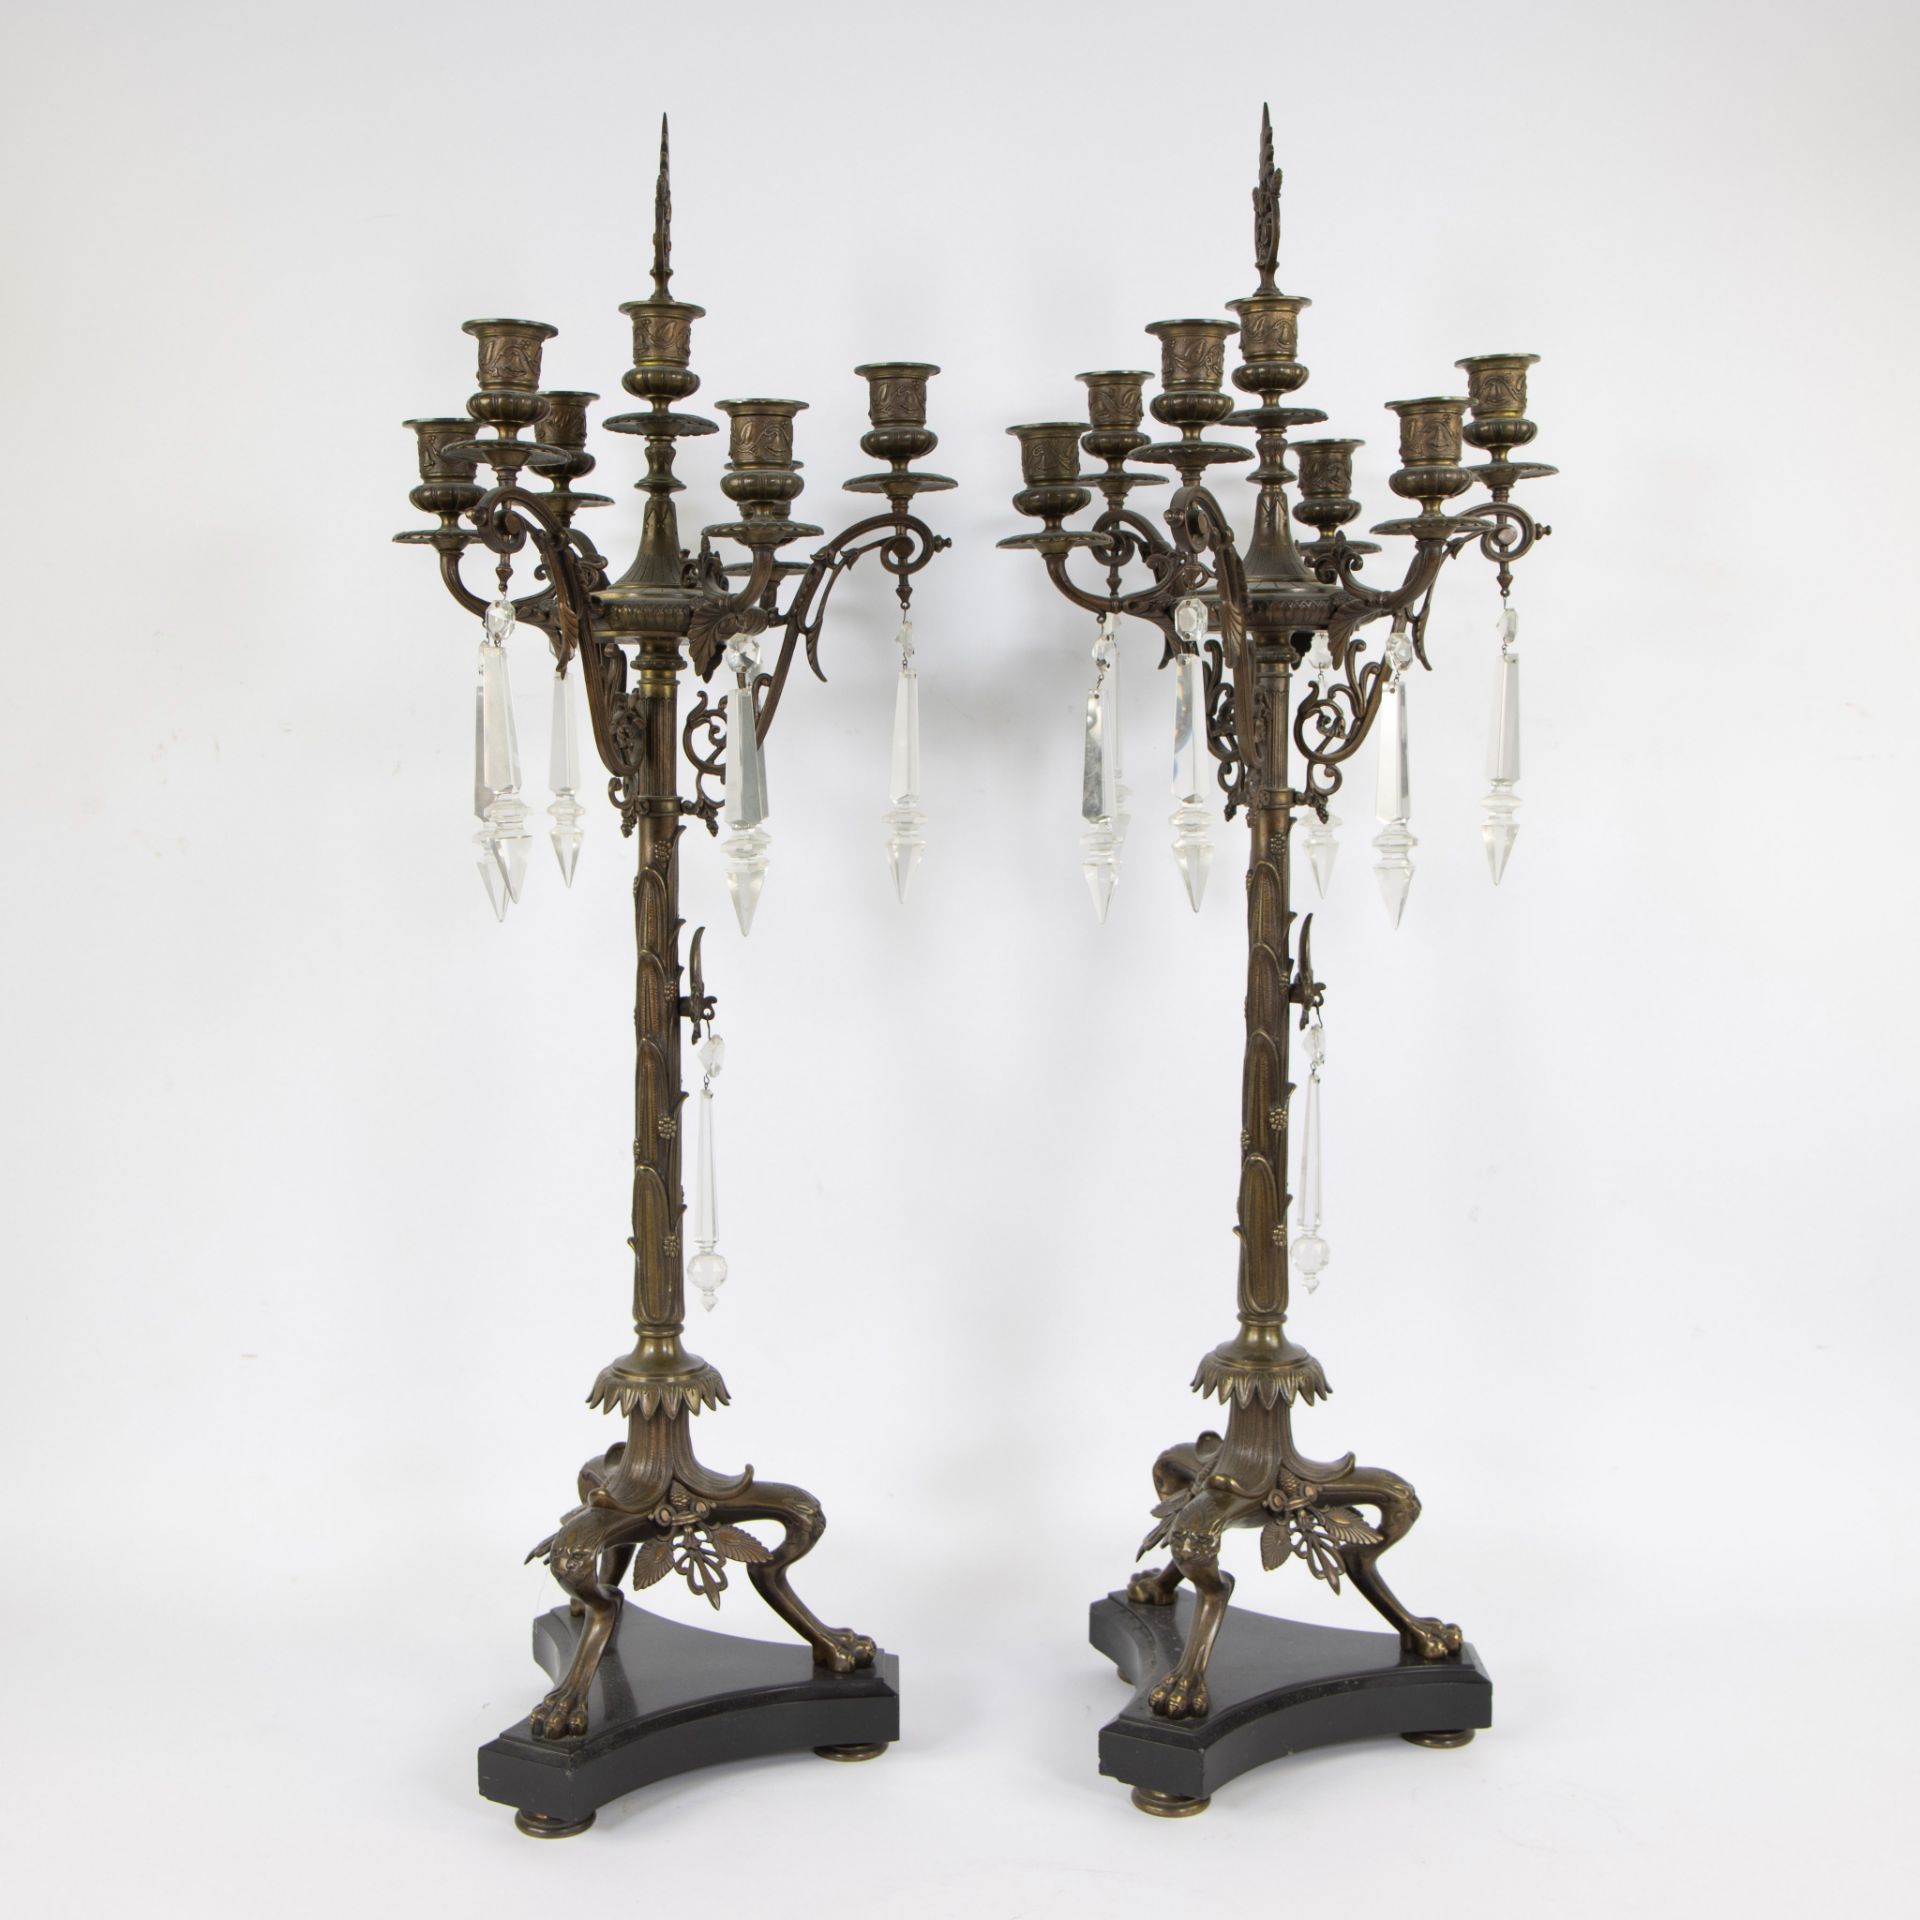 Two large rare solid bronze 19th century candlesticks with 7 light points, standing on claw feet and - Image 5 of 5